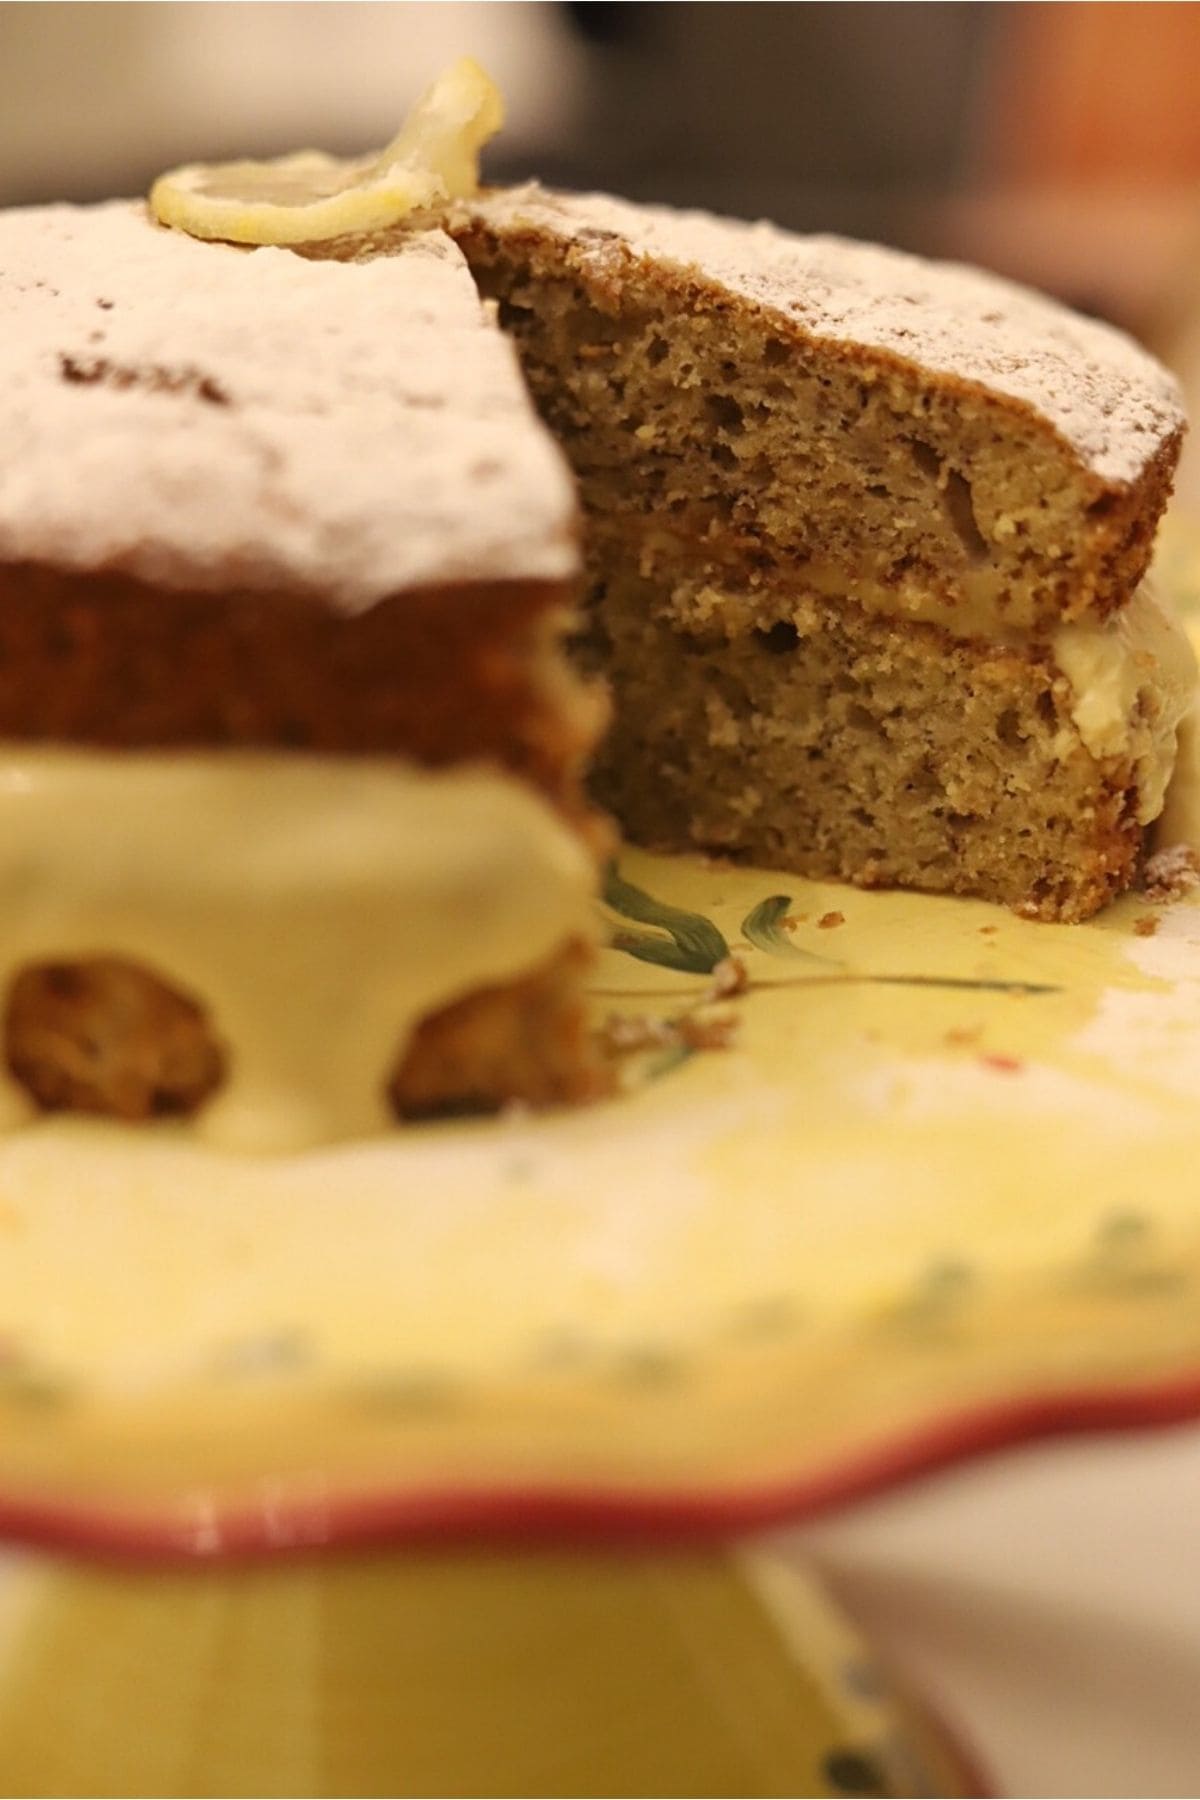 Image showing cake with a slice removed to show cake texture.